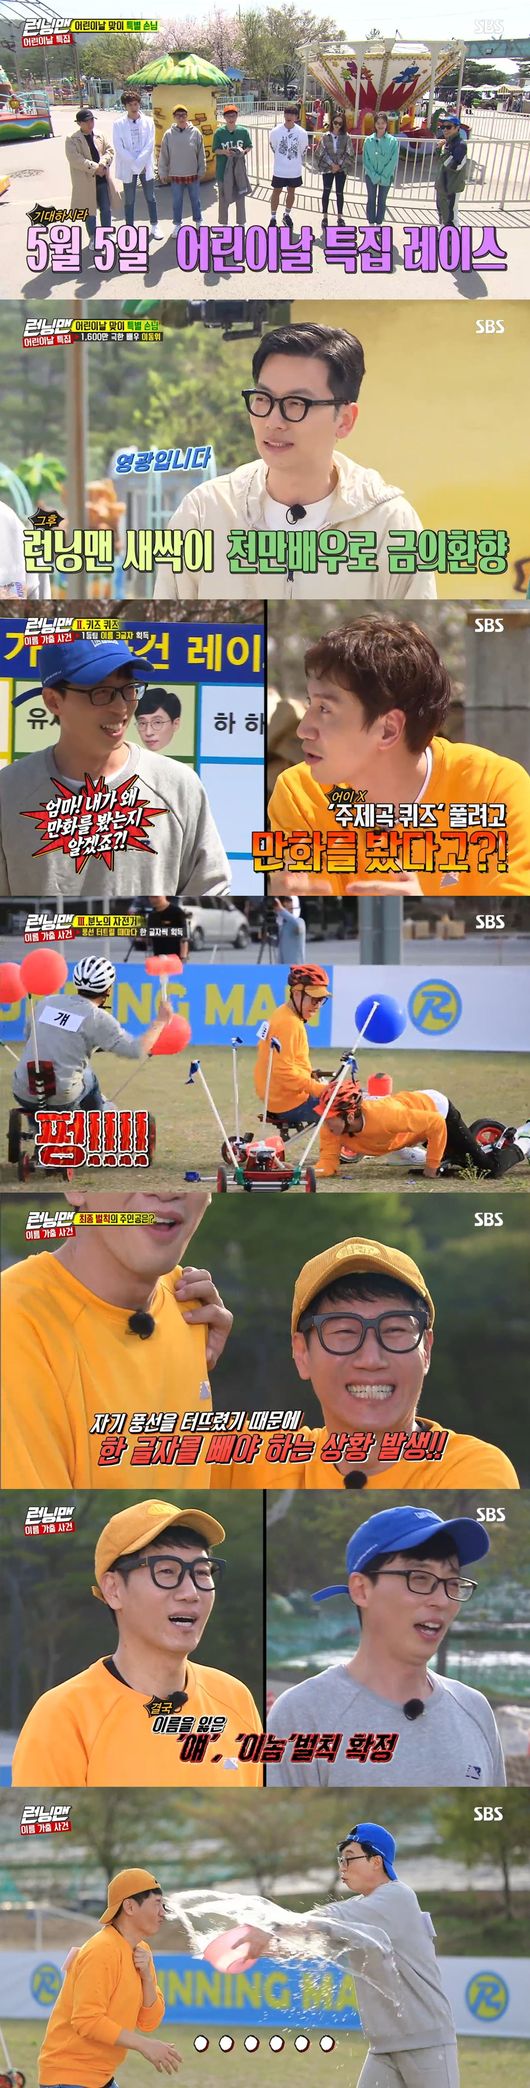 Yoo Jae-Suk and Ji Suk-jin became the main characters of the best one minute.According to Nielsen Korea, a ratings agency on the 6th, the average audience rating of SBS entertainment program Running Man, which was broadcast on the 5th, was 4.2% in the first part and 5.9% in the second part (based on the audience rating of households in the metropolitan area).The highest audience rating per minute was 6.4 percent.On the same day, Running Man was decorated with the special Name Runaway Case Race on Childrens Day, and the members went to Game to regain the name tag with their name.Guests included Yi Dong-hwi, who was about to release the film Little Clients; Father Avengers Ji Suk-jin, Yoo Jae-Suk and Haha became team leaders.The Ji Suk-jin team was teamed by Lee Kwang-soo and Song Ji-hyoga, the Yoo Jae-Suk team was teamed by Yi Dong-hwi and Yang Se-chan, and the Haha team was teamed by Jeon So-min and Kim Jong-kook.Since then, a full-scale race has begun.The first game was an age of memories that the first team could acquire four letters of name, and the second was a Kids Quiz, where the first team could acquire three letters of name.The last mission is a tump-bump bike that can find the name as needed. Every time you ride a bicycle and burst the balloon of your opponent, you get one letter.In the first half, the ace Kim Jong-kooks performance led to the victory of the small teams (Kim Jong-kook, Haha and Jeon So-min) and the remaining two teams in the second half.Lee Kwang-soos baby tricycle failed to beat the weight and broke two dongs, and the same team Yi Dong-hwi was in crisis because only one remaining balloon remained.Eventually, the race ended with Yang Se-chan bursting Lee Kwang-soos remaining balloon.As Yoo Jae-Suk found Seok, Ji Suk-jin also found all the names, but Ji Suk-jin had to take one out at the end of his balloon.Lee Kwang-soo, who won the scissors rock, took out the stone and Ji Suk-jin and Yoo Jae-Suk, who were not completed, were punished.The scene recorded the highest audience rating of 6.4% per minute, accounting for the best one minute.